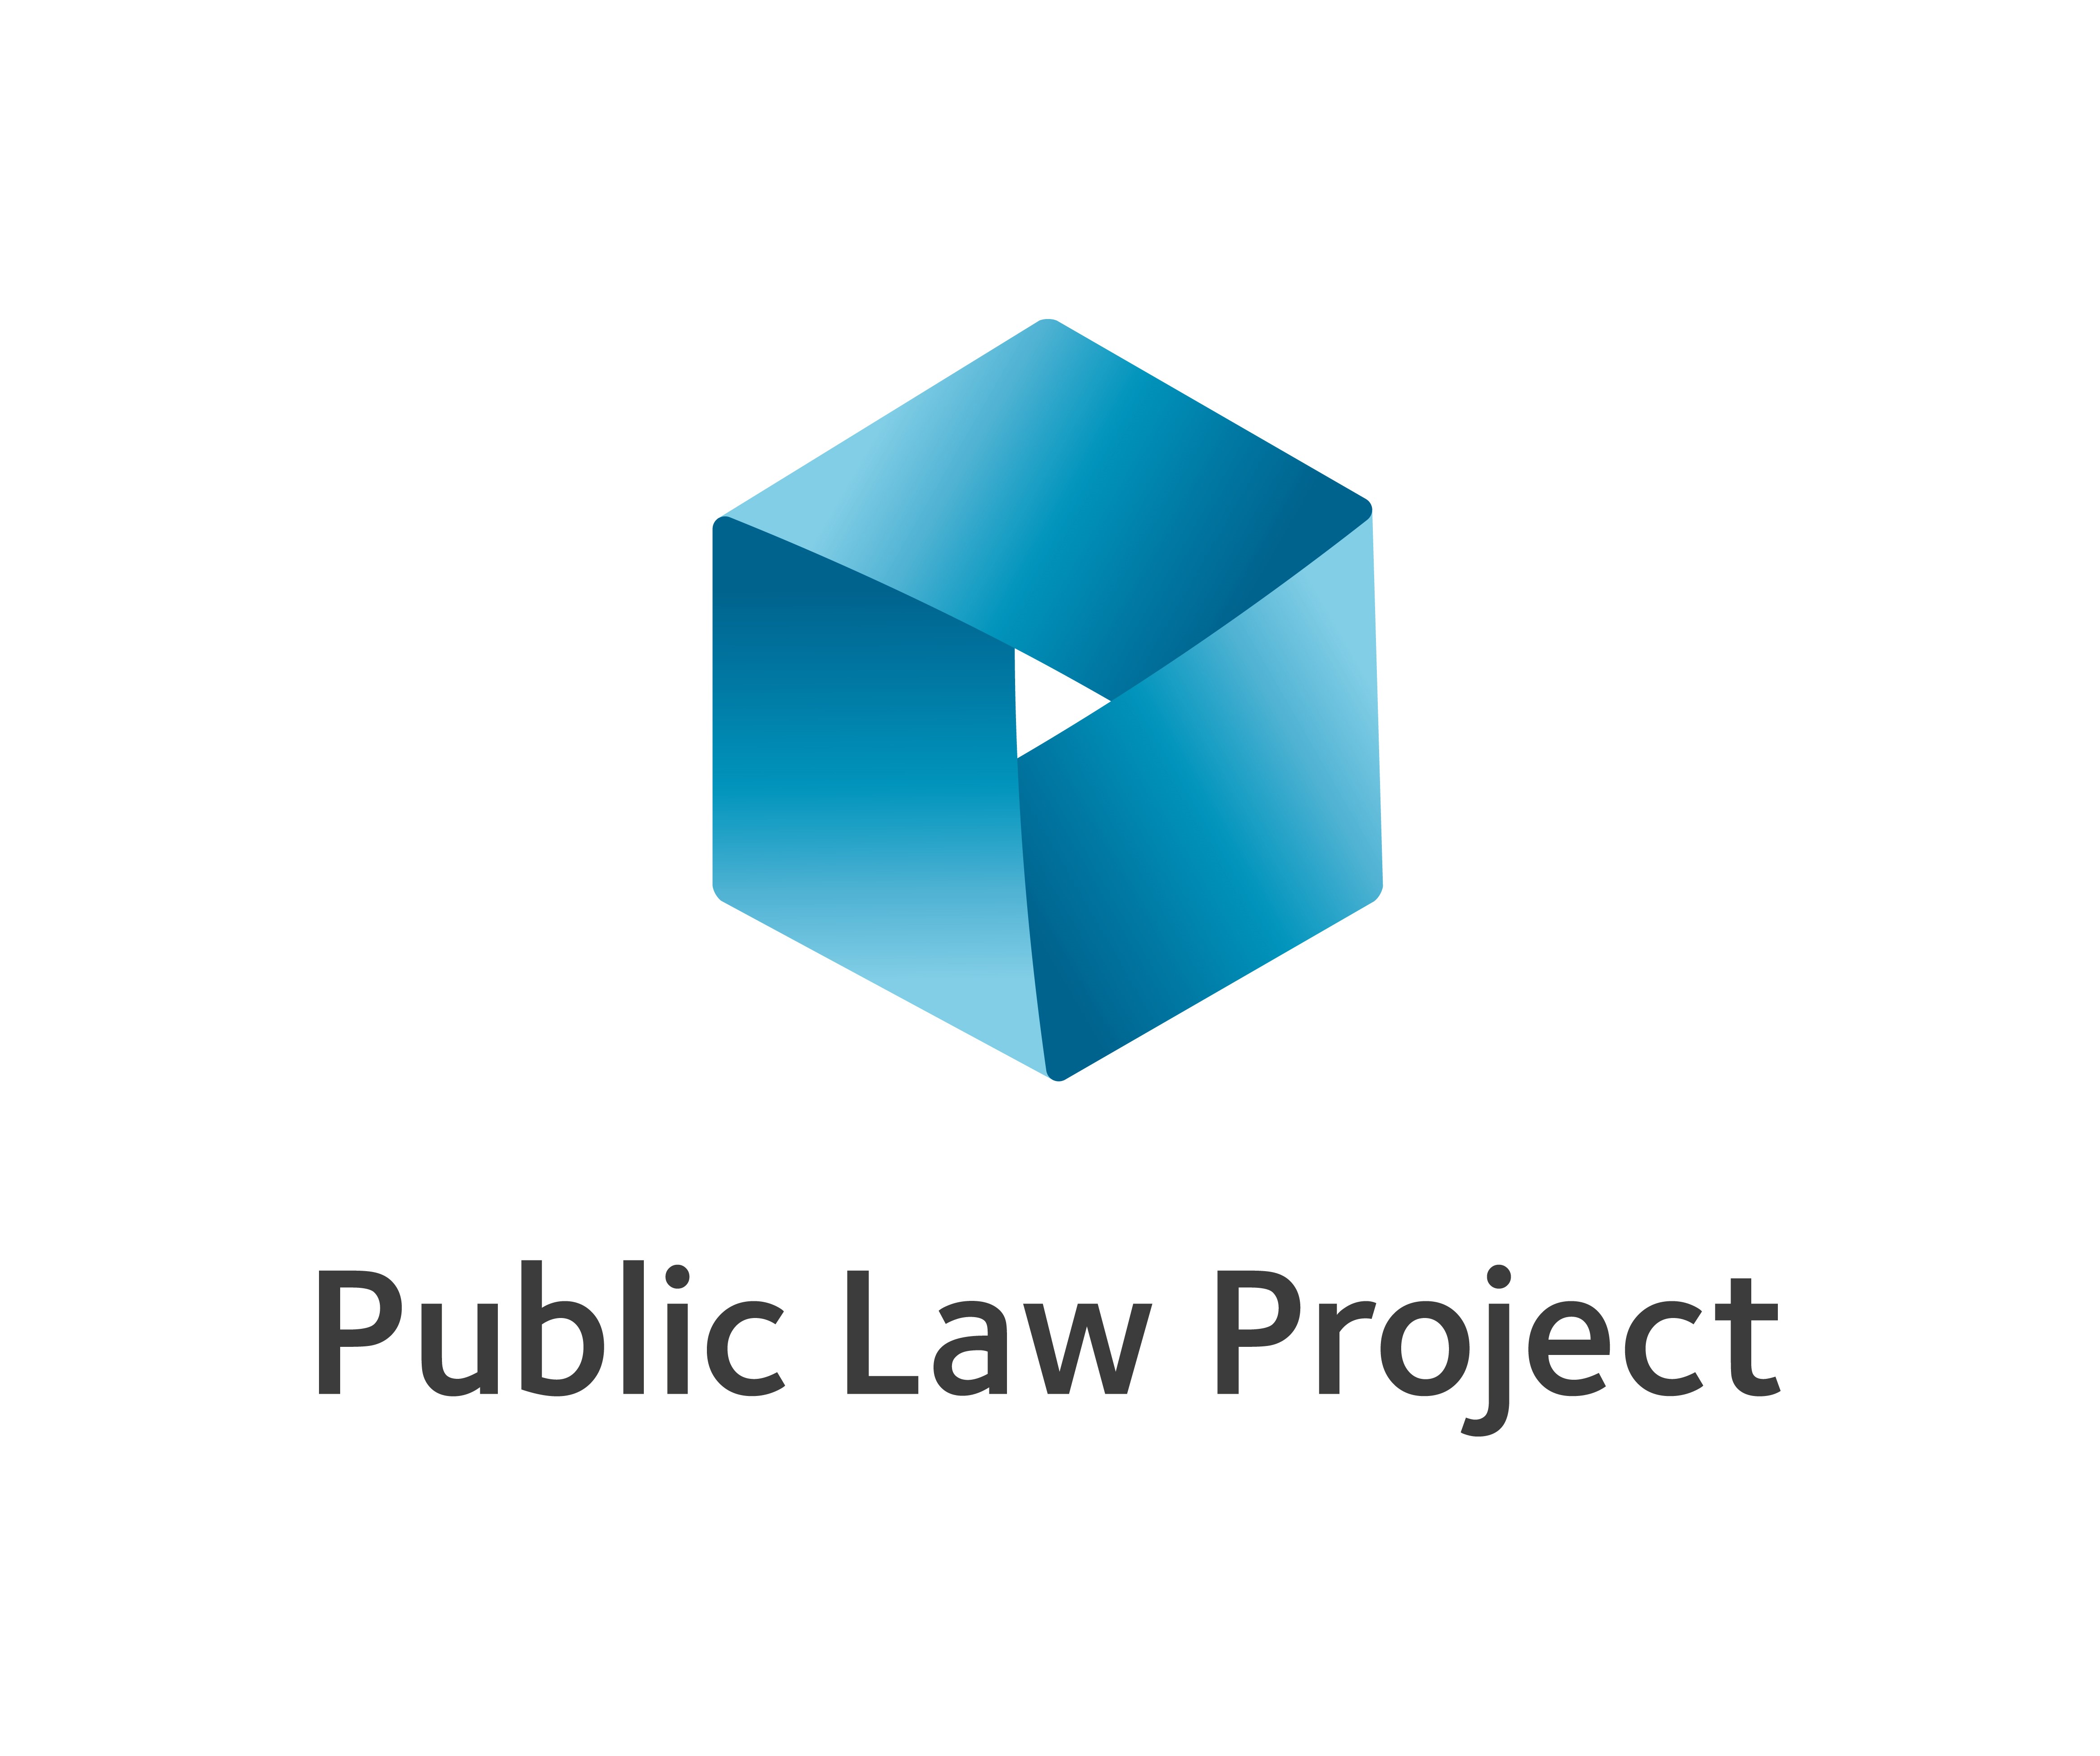 The Public Law Project